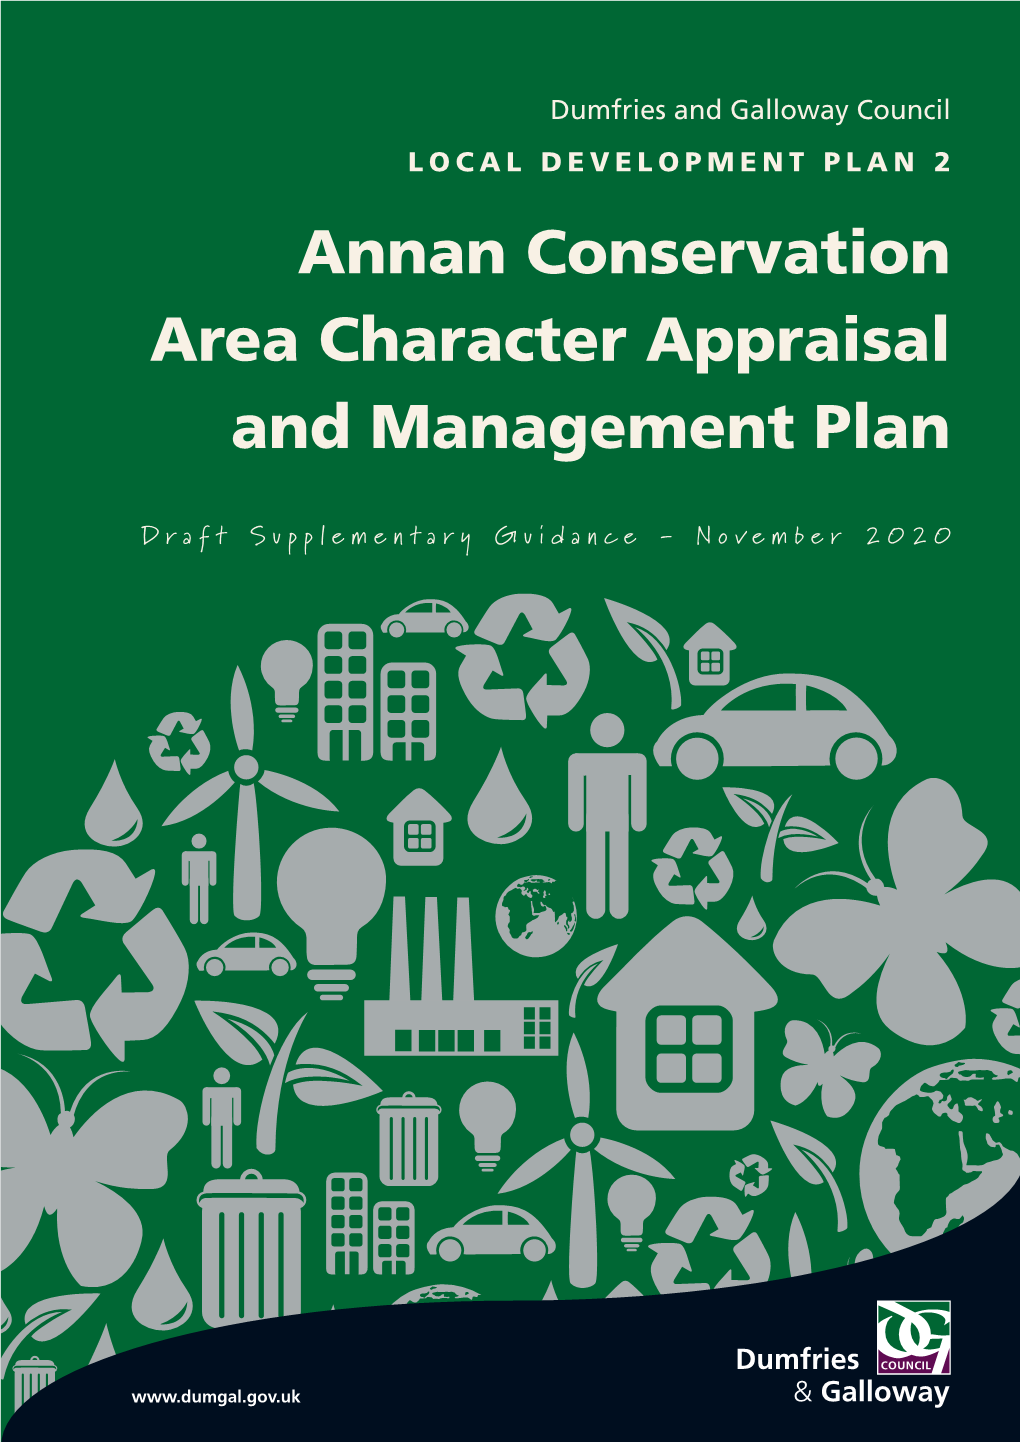 Annan Conservation Area Character Appraisal and Management Plan